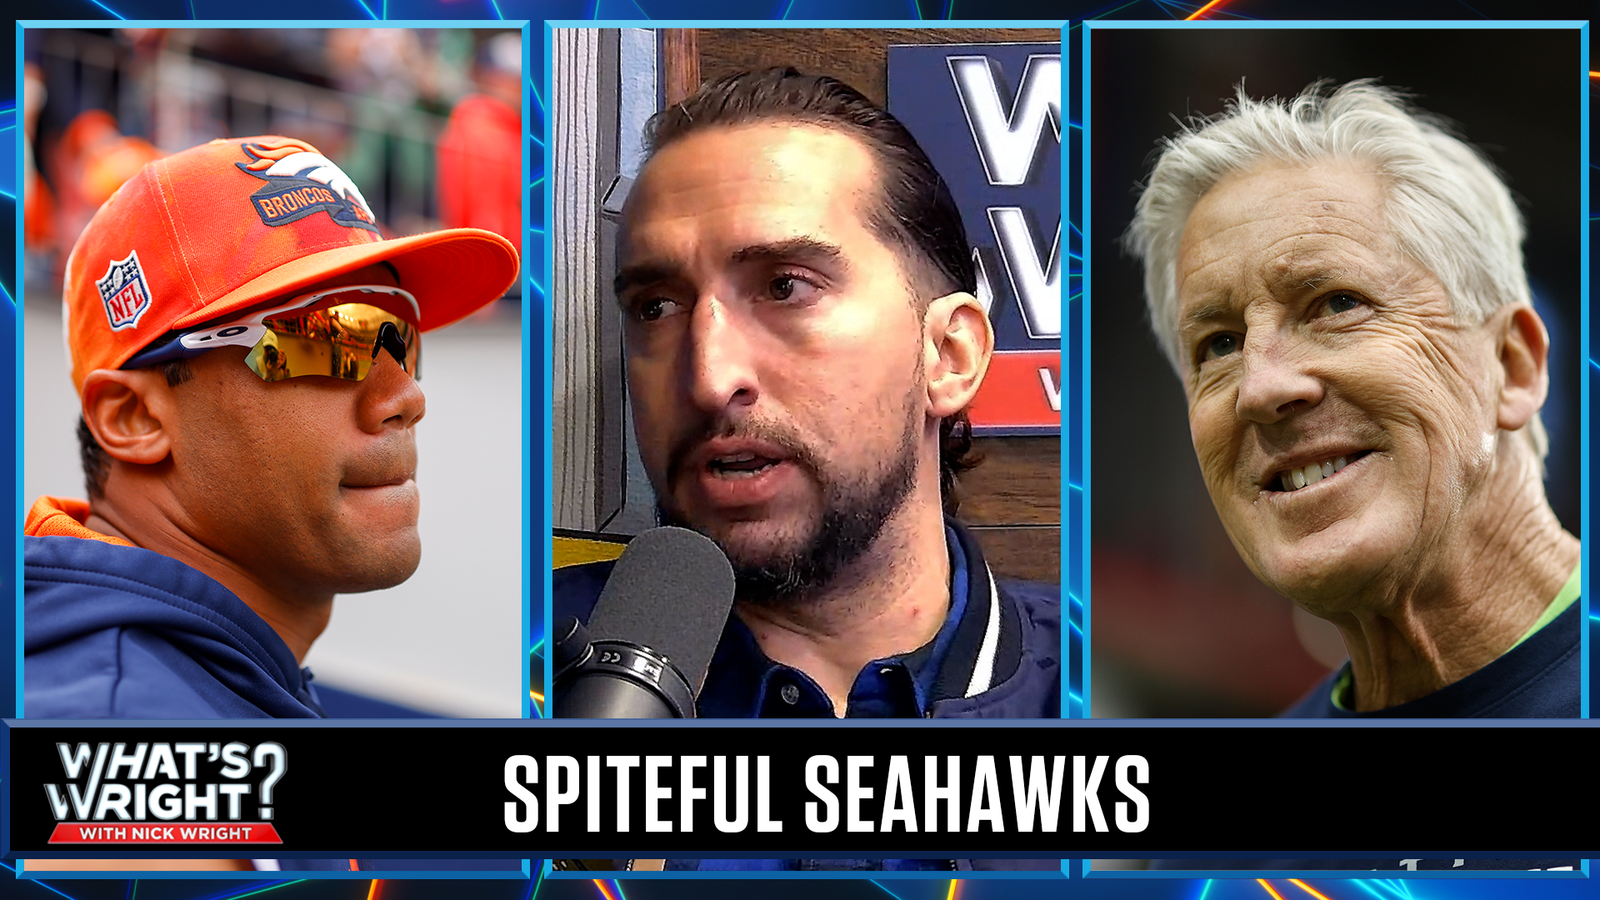 Are Pete Carroll and Seahawks winning out of spite?